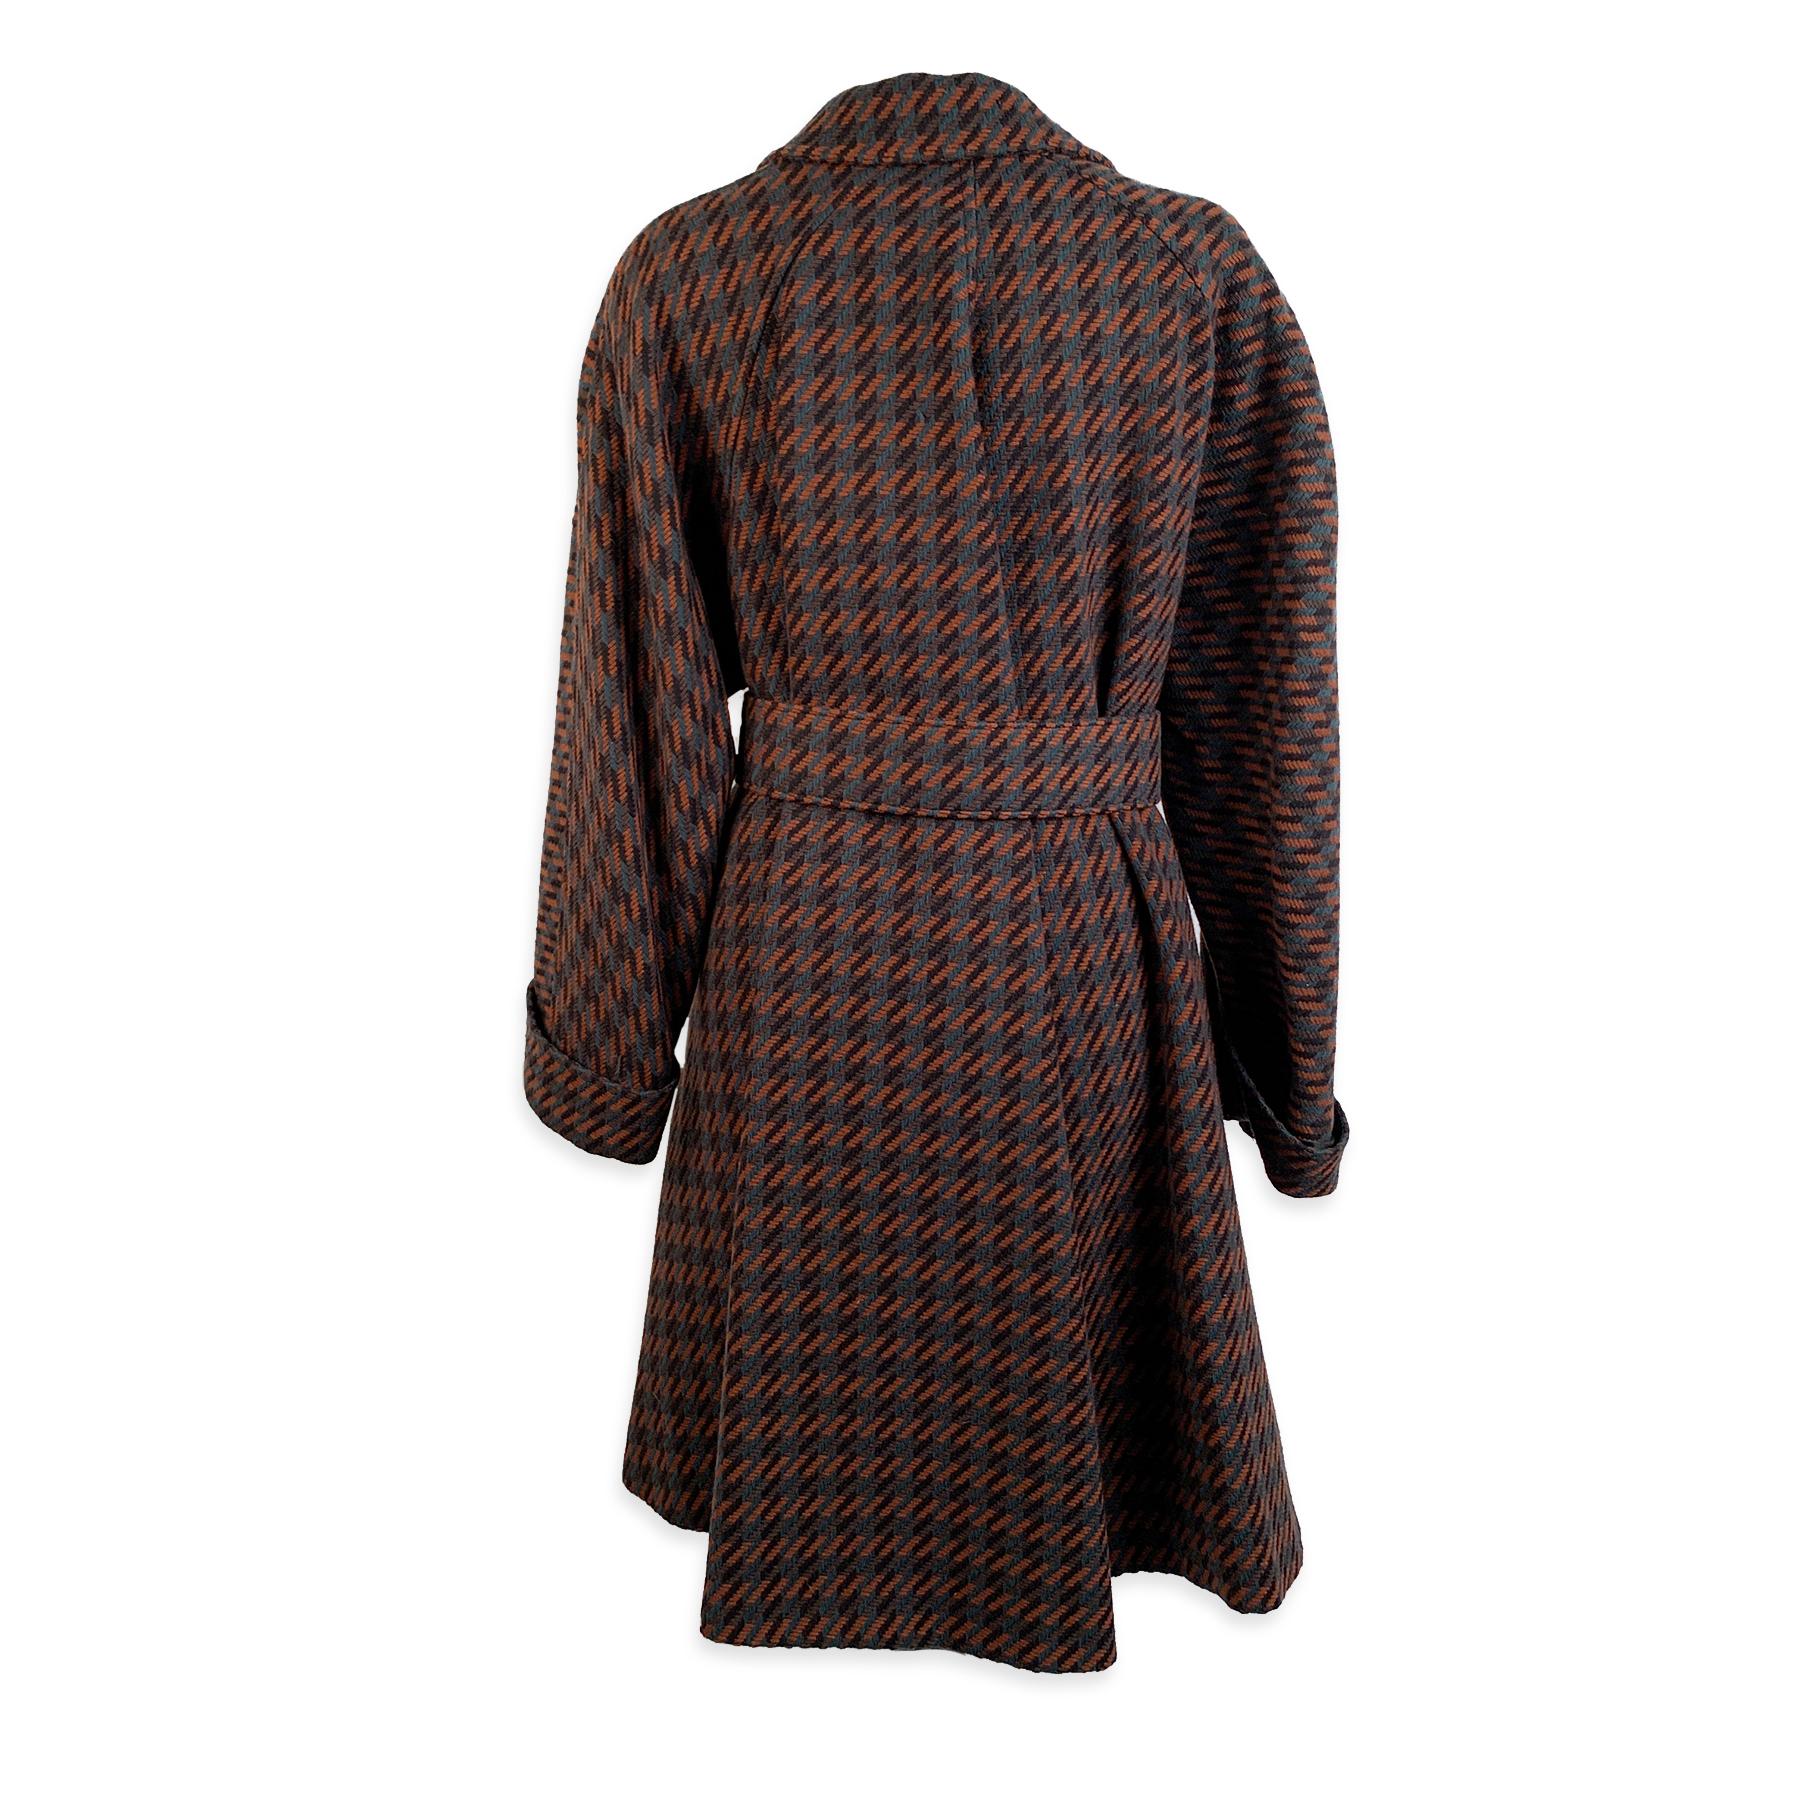 'Missoni Donna' vintage coat, crafted in patterned wool-look fabric, in autumn colors (green, brown and black). It features an oversized fit, a belted waistline, long sleeve styling with rolled cuffs and 2 side pockets. Composition tag is missing